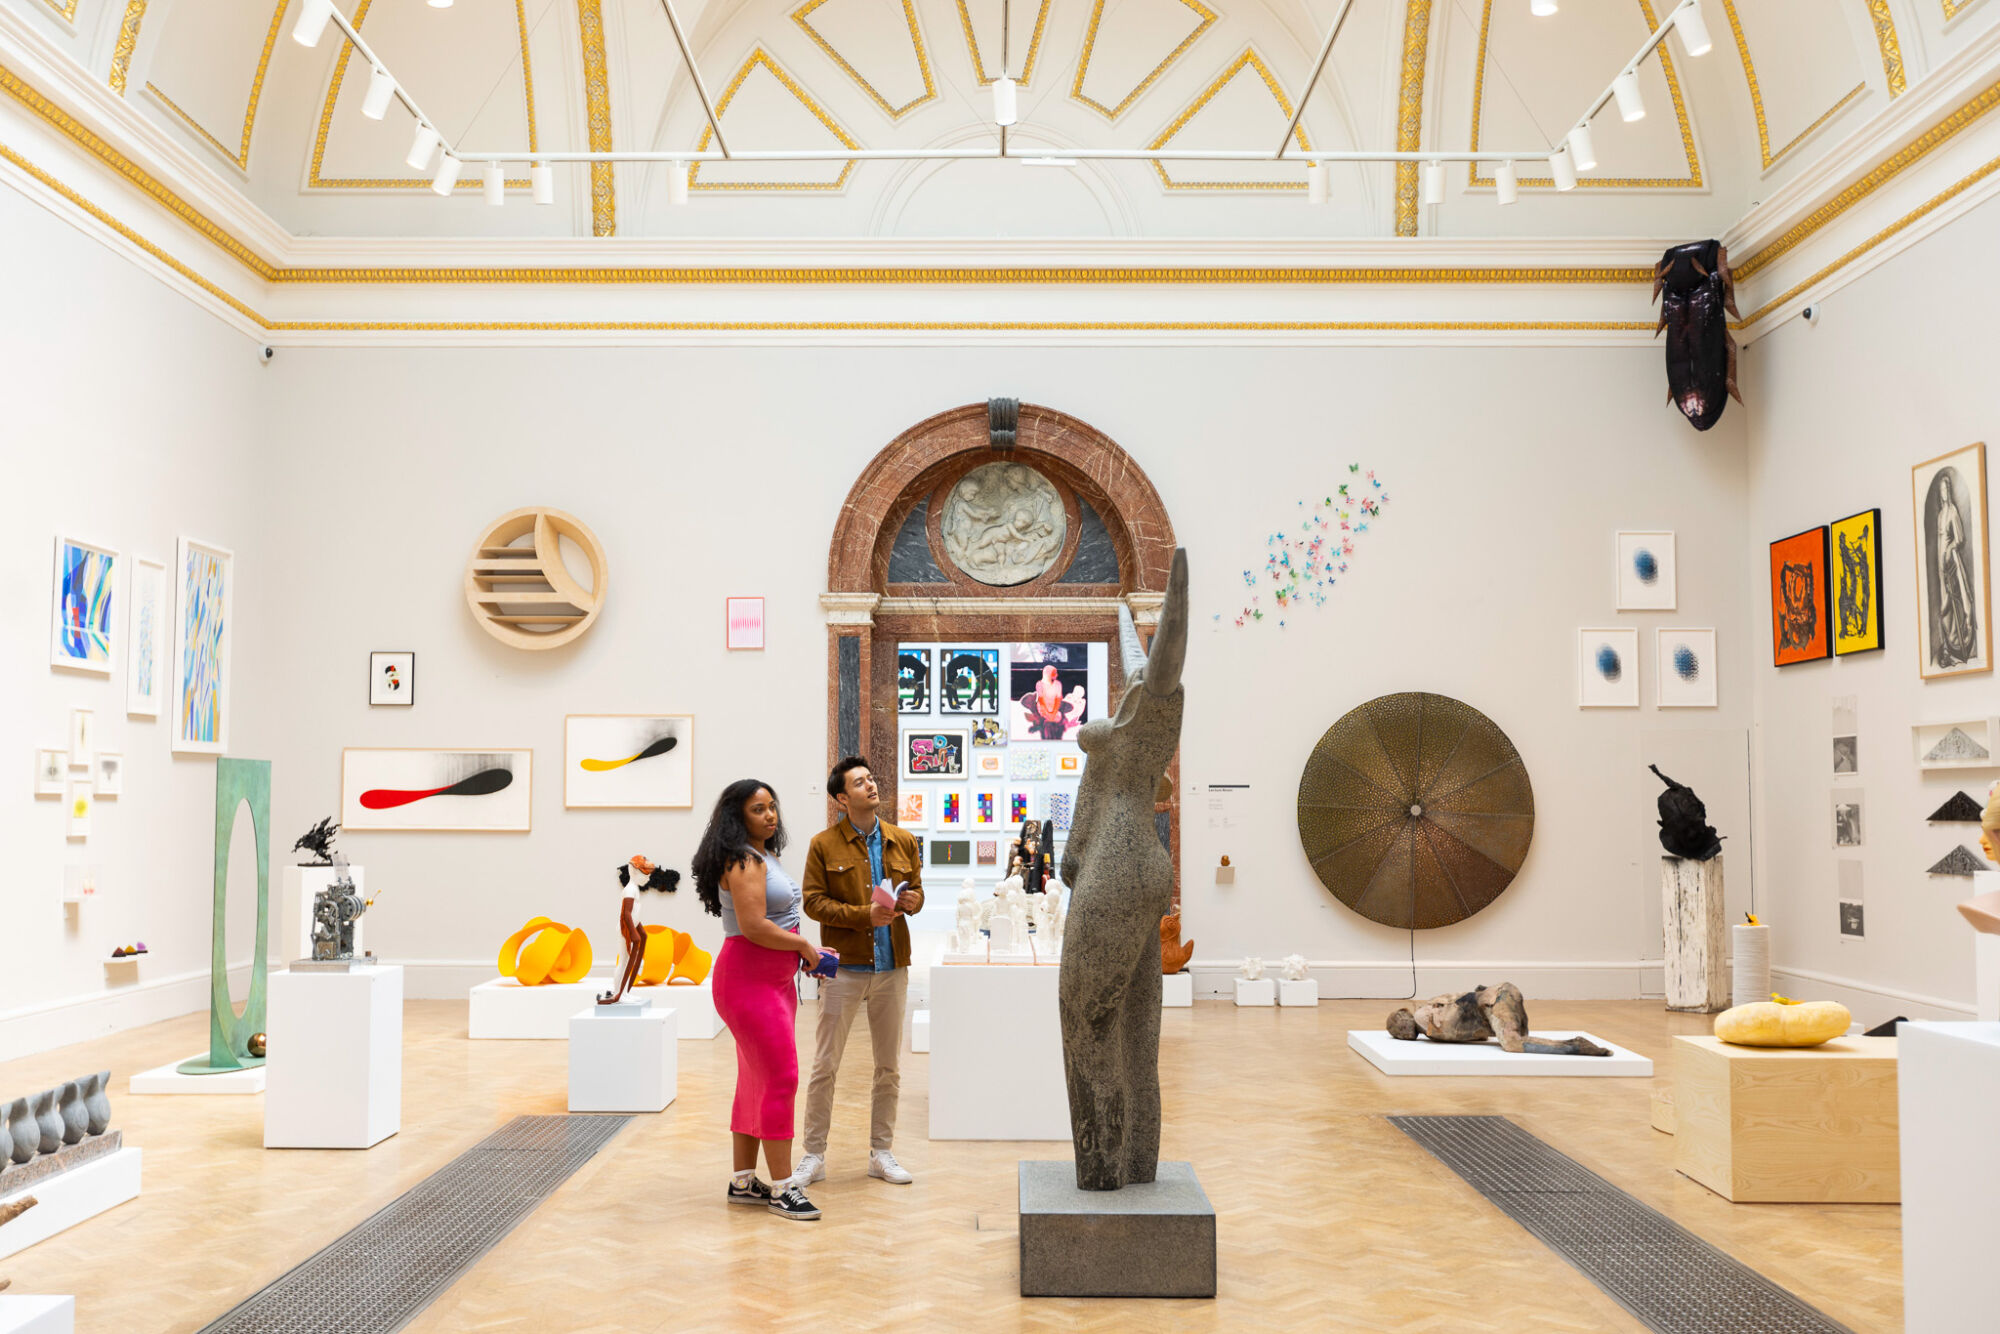 The Wick - Installation view of the Summer Exhibition 2023 at the Royal Academy of Arts in London, 13 June - 20 August 2023.
Photo: © David Parry/ Royal Academy of Arts